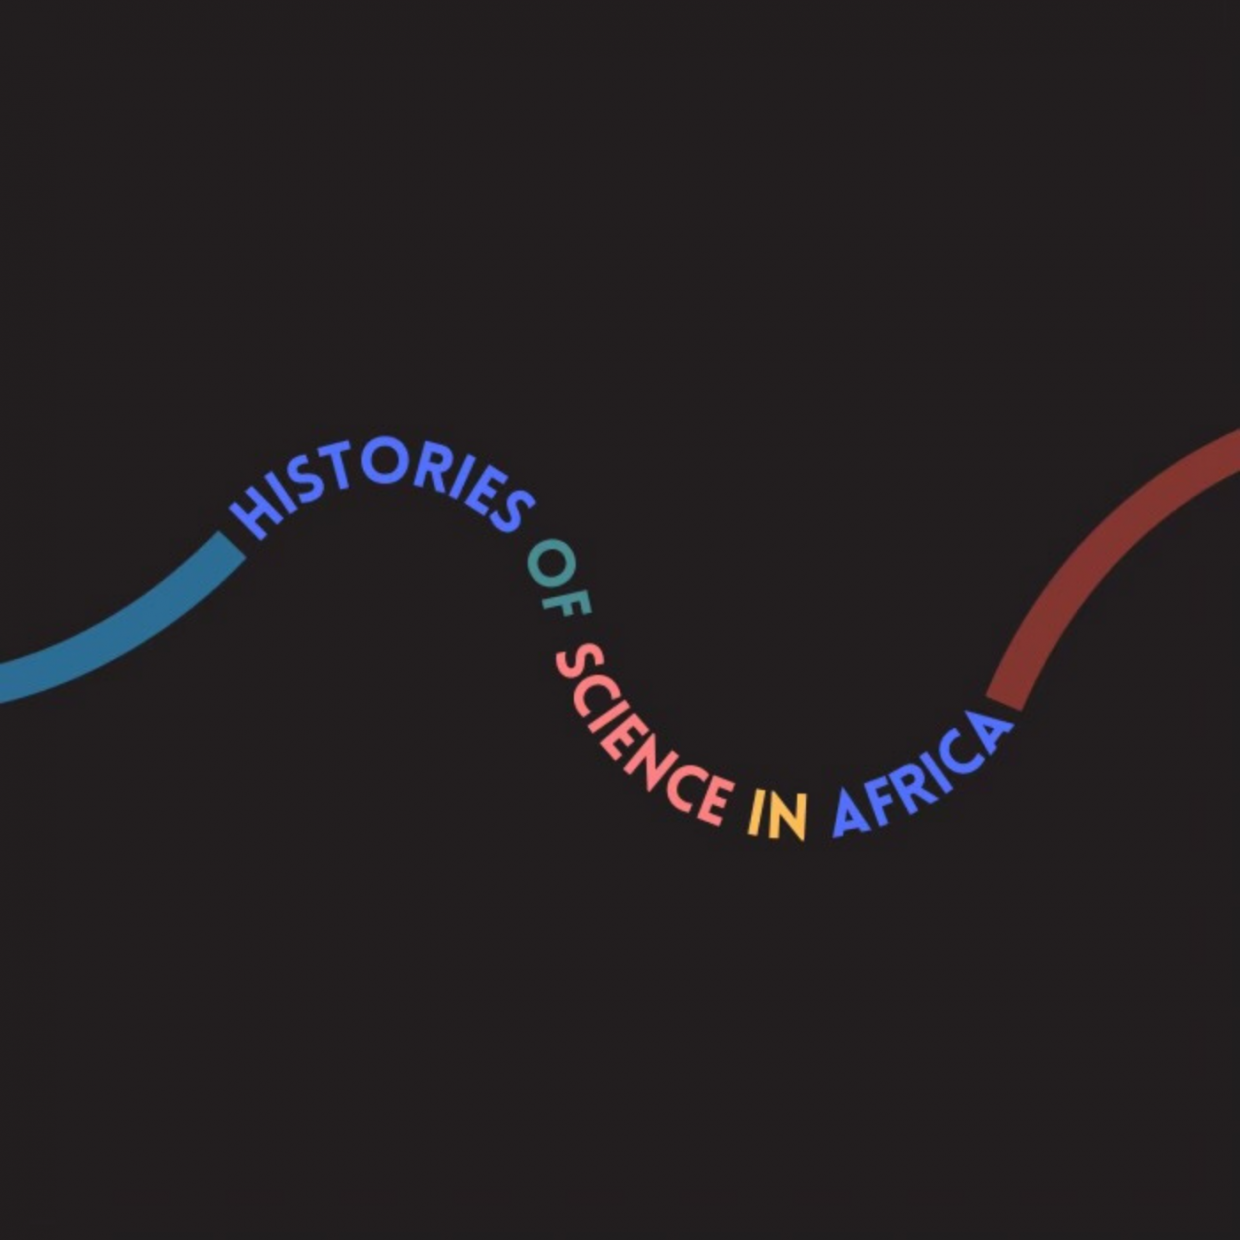 Histories of science in Africa Podcast Logo